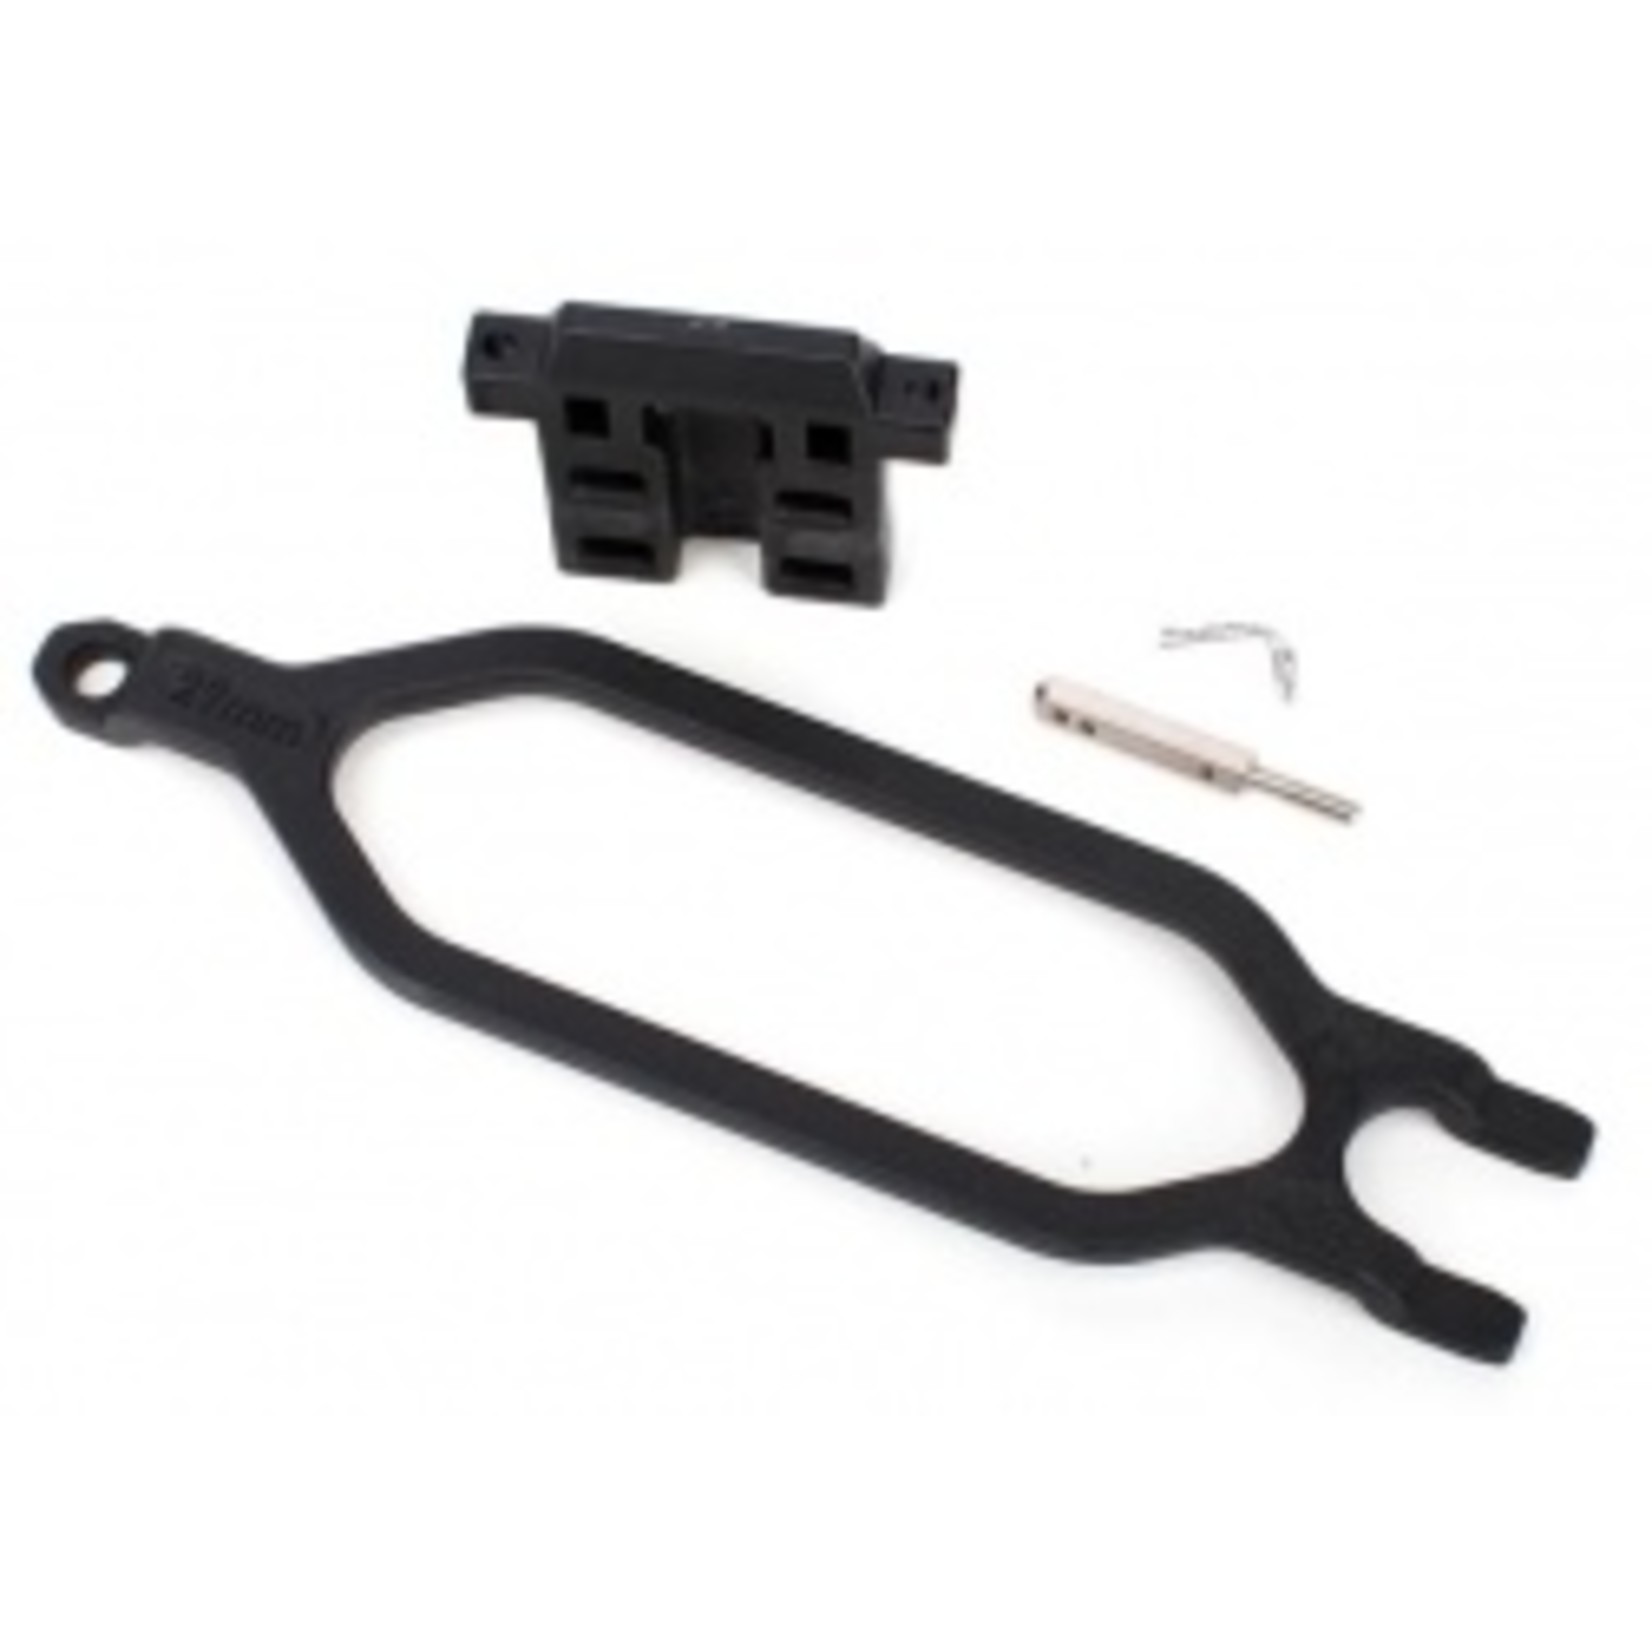 Traxxas 6727X Hold down, battery/ hold down retainer/ battery post/ angled body clip (allows for installation of taller, multi-cell batteries)